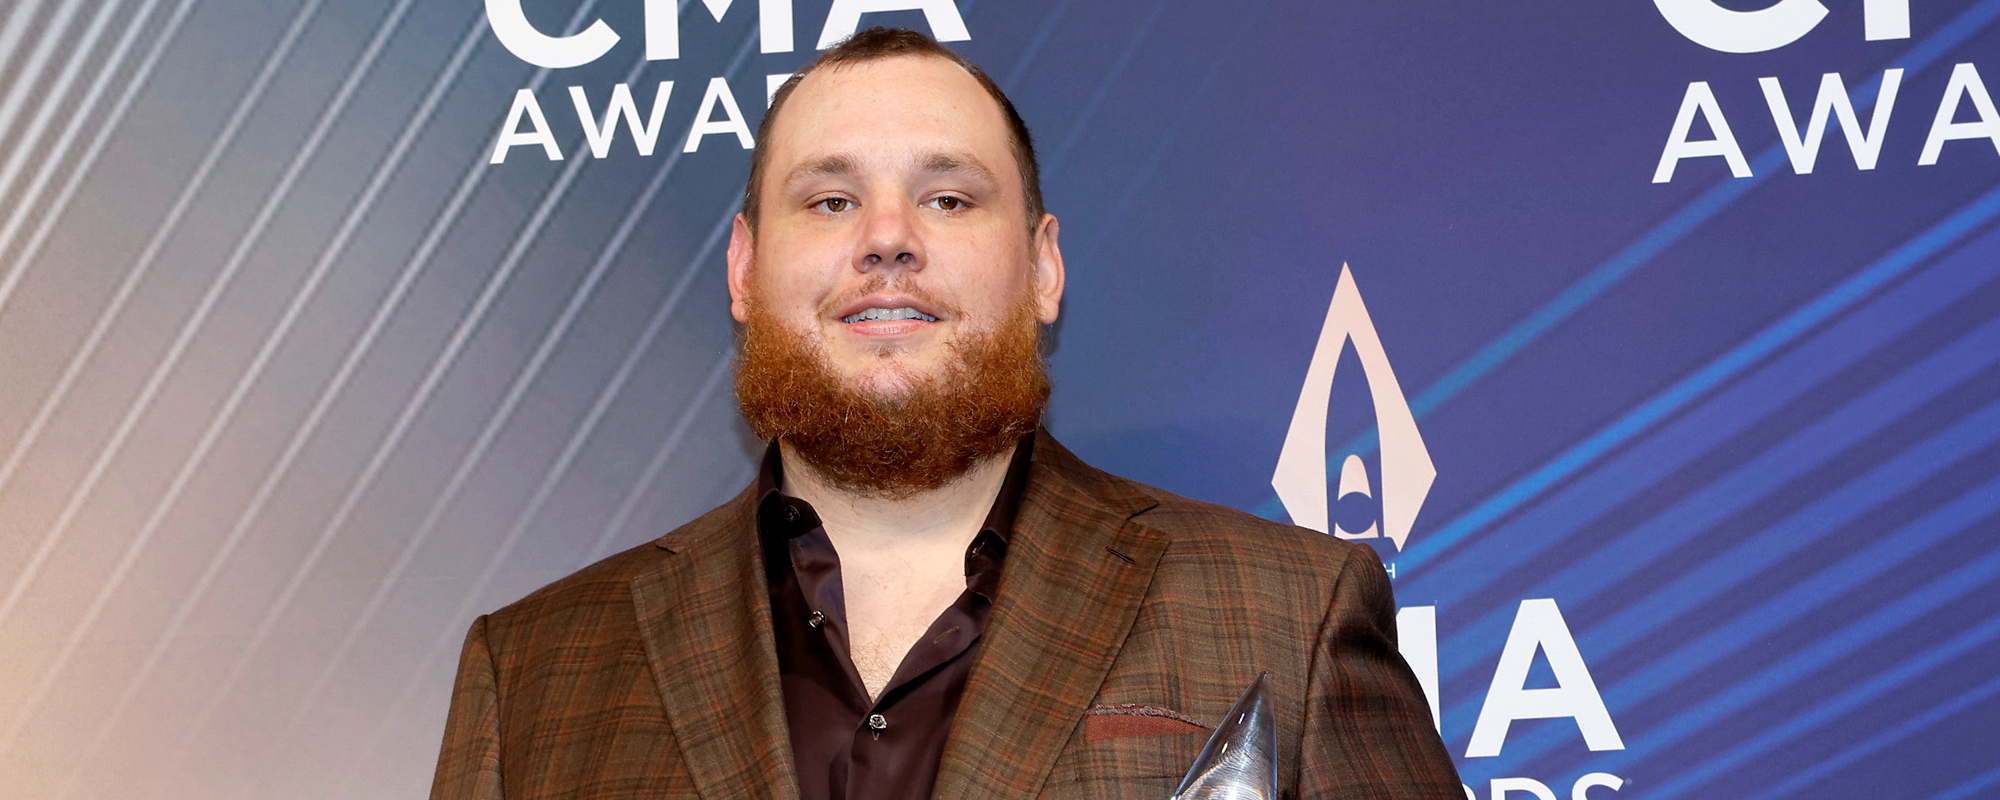 Luke Combs Anoints “Fast Car” Duet a “Defining Moment” in His Career, Tracy Chapman Responds